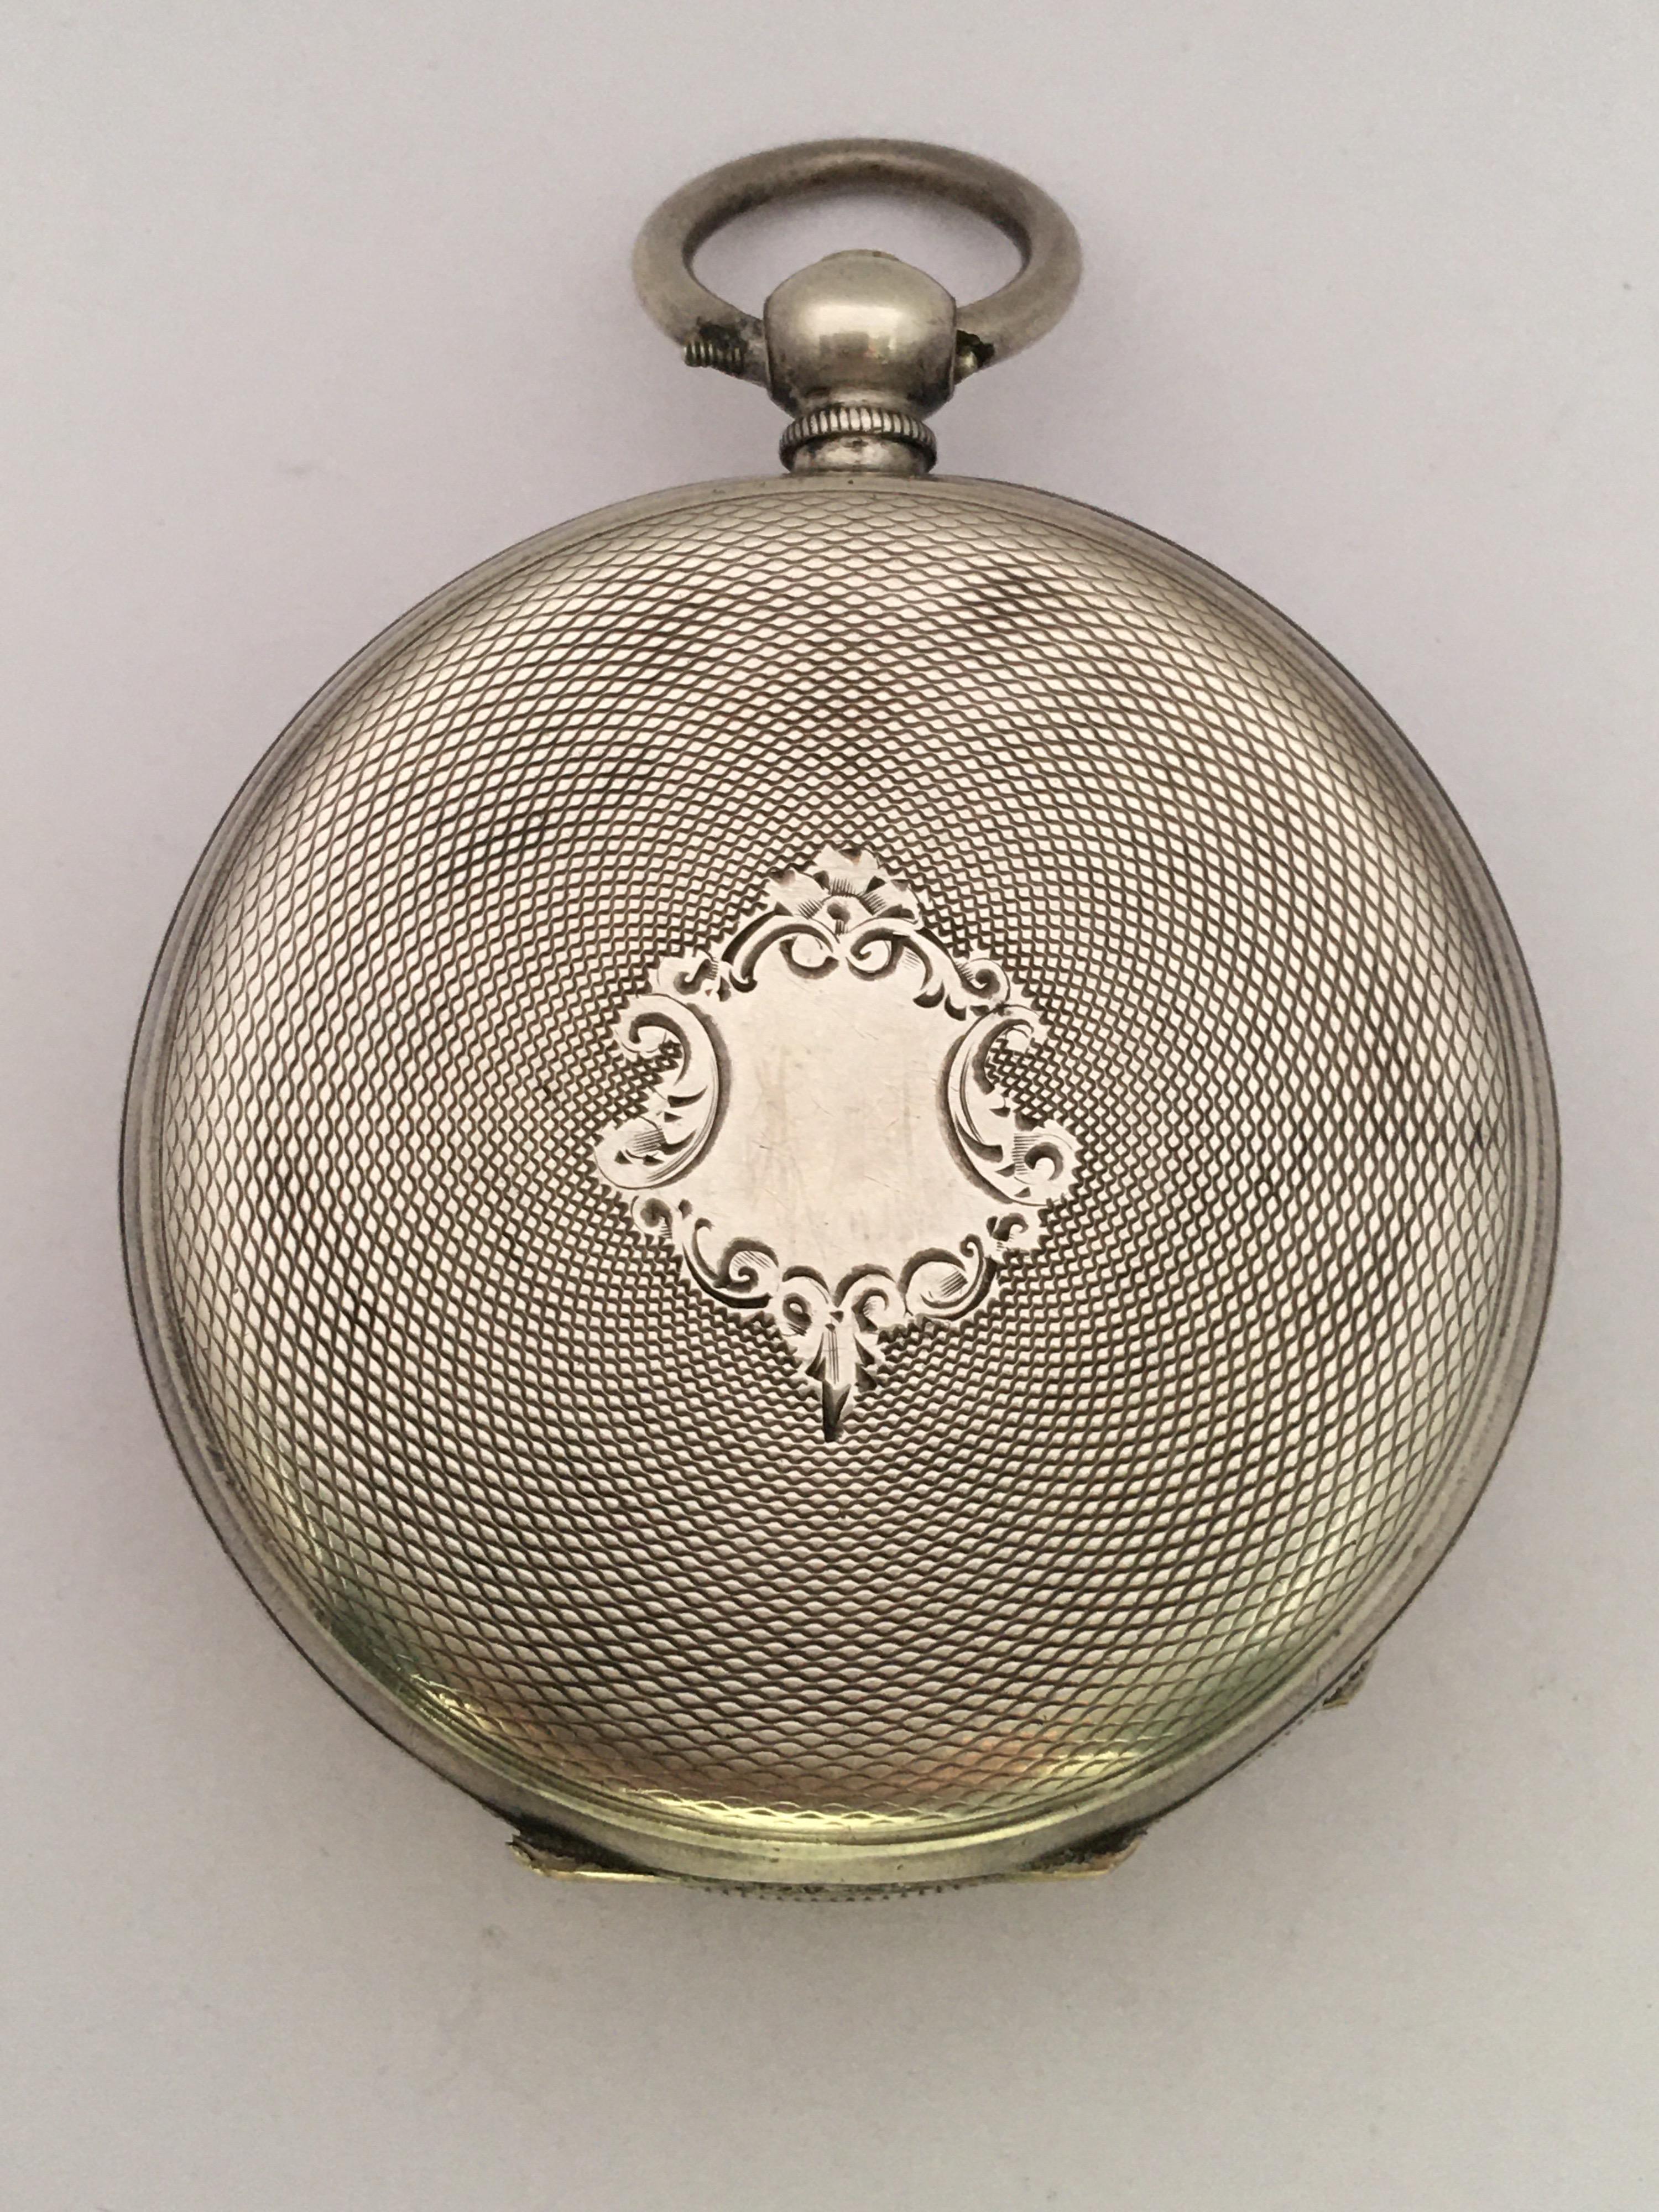 This beautiful antique 51mm diameter (excluding crown) Silver Pocket watch is in good working condition and it is ticking nicely. It is recently been serviced and it runs well. Visible signs of ageing and wear with light tiny scratches on the glass